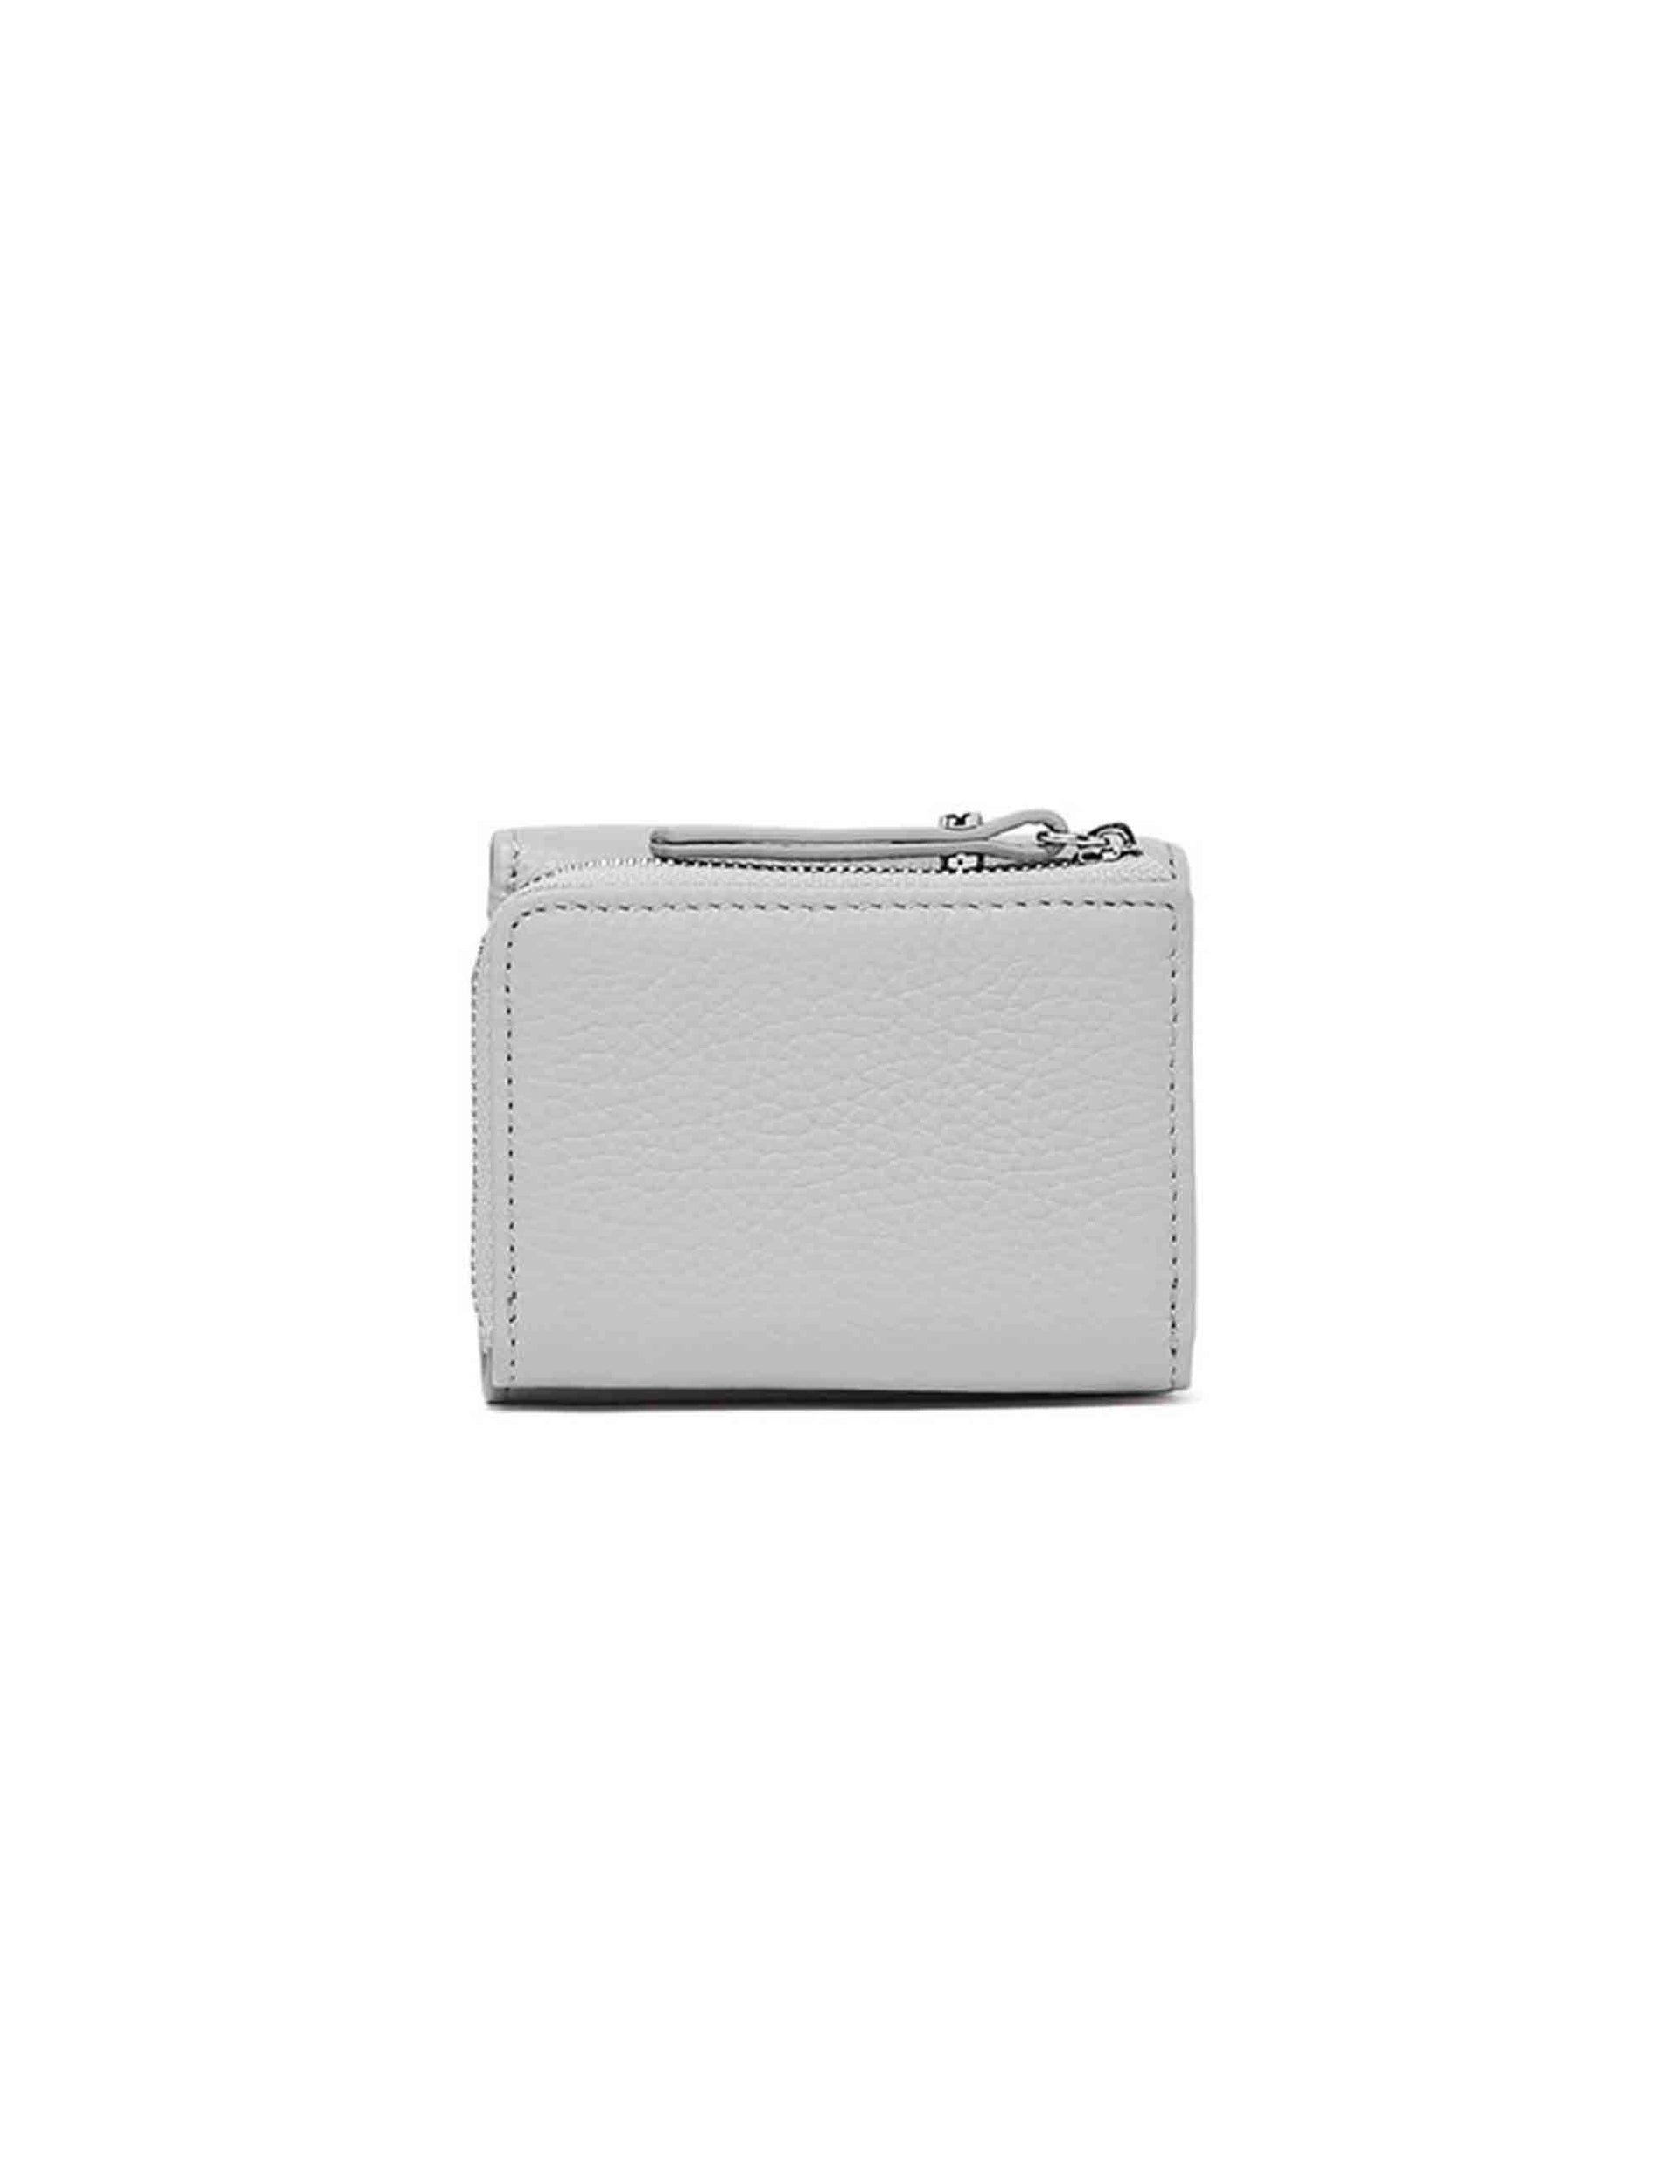 Women's gray leather wallet with external coin purse